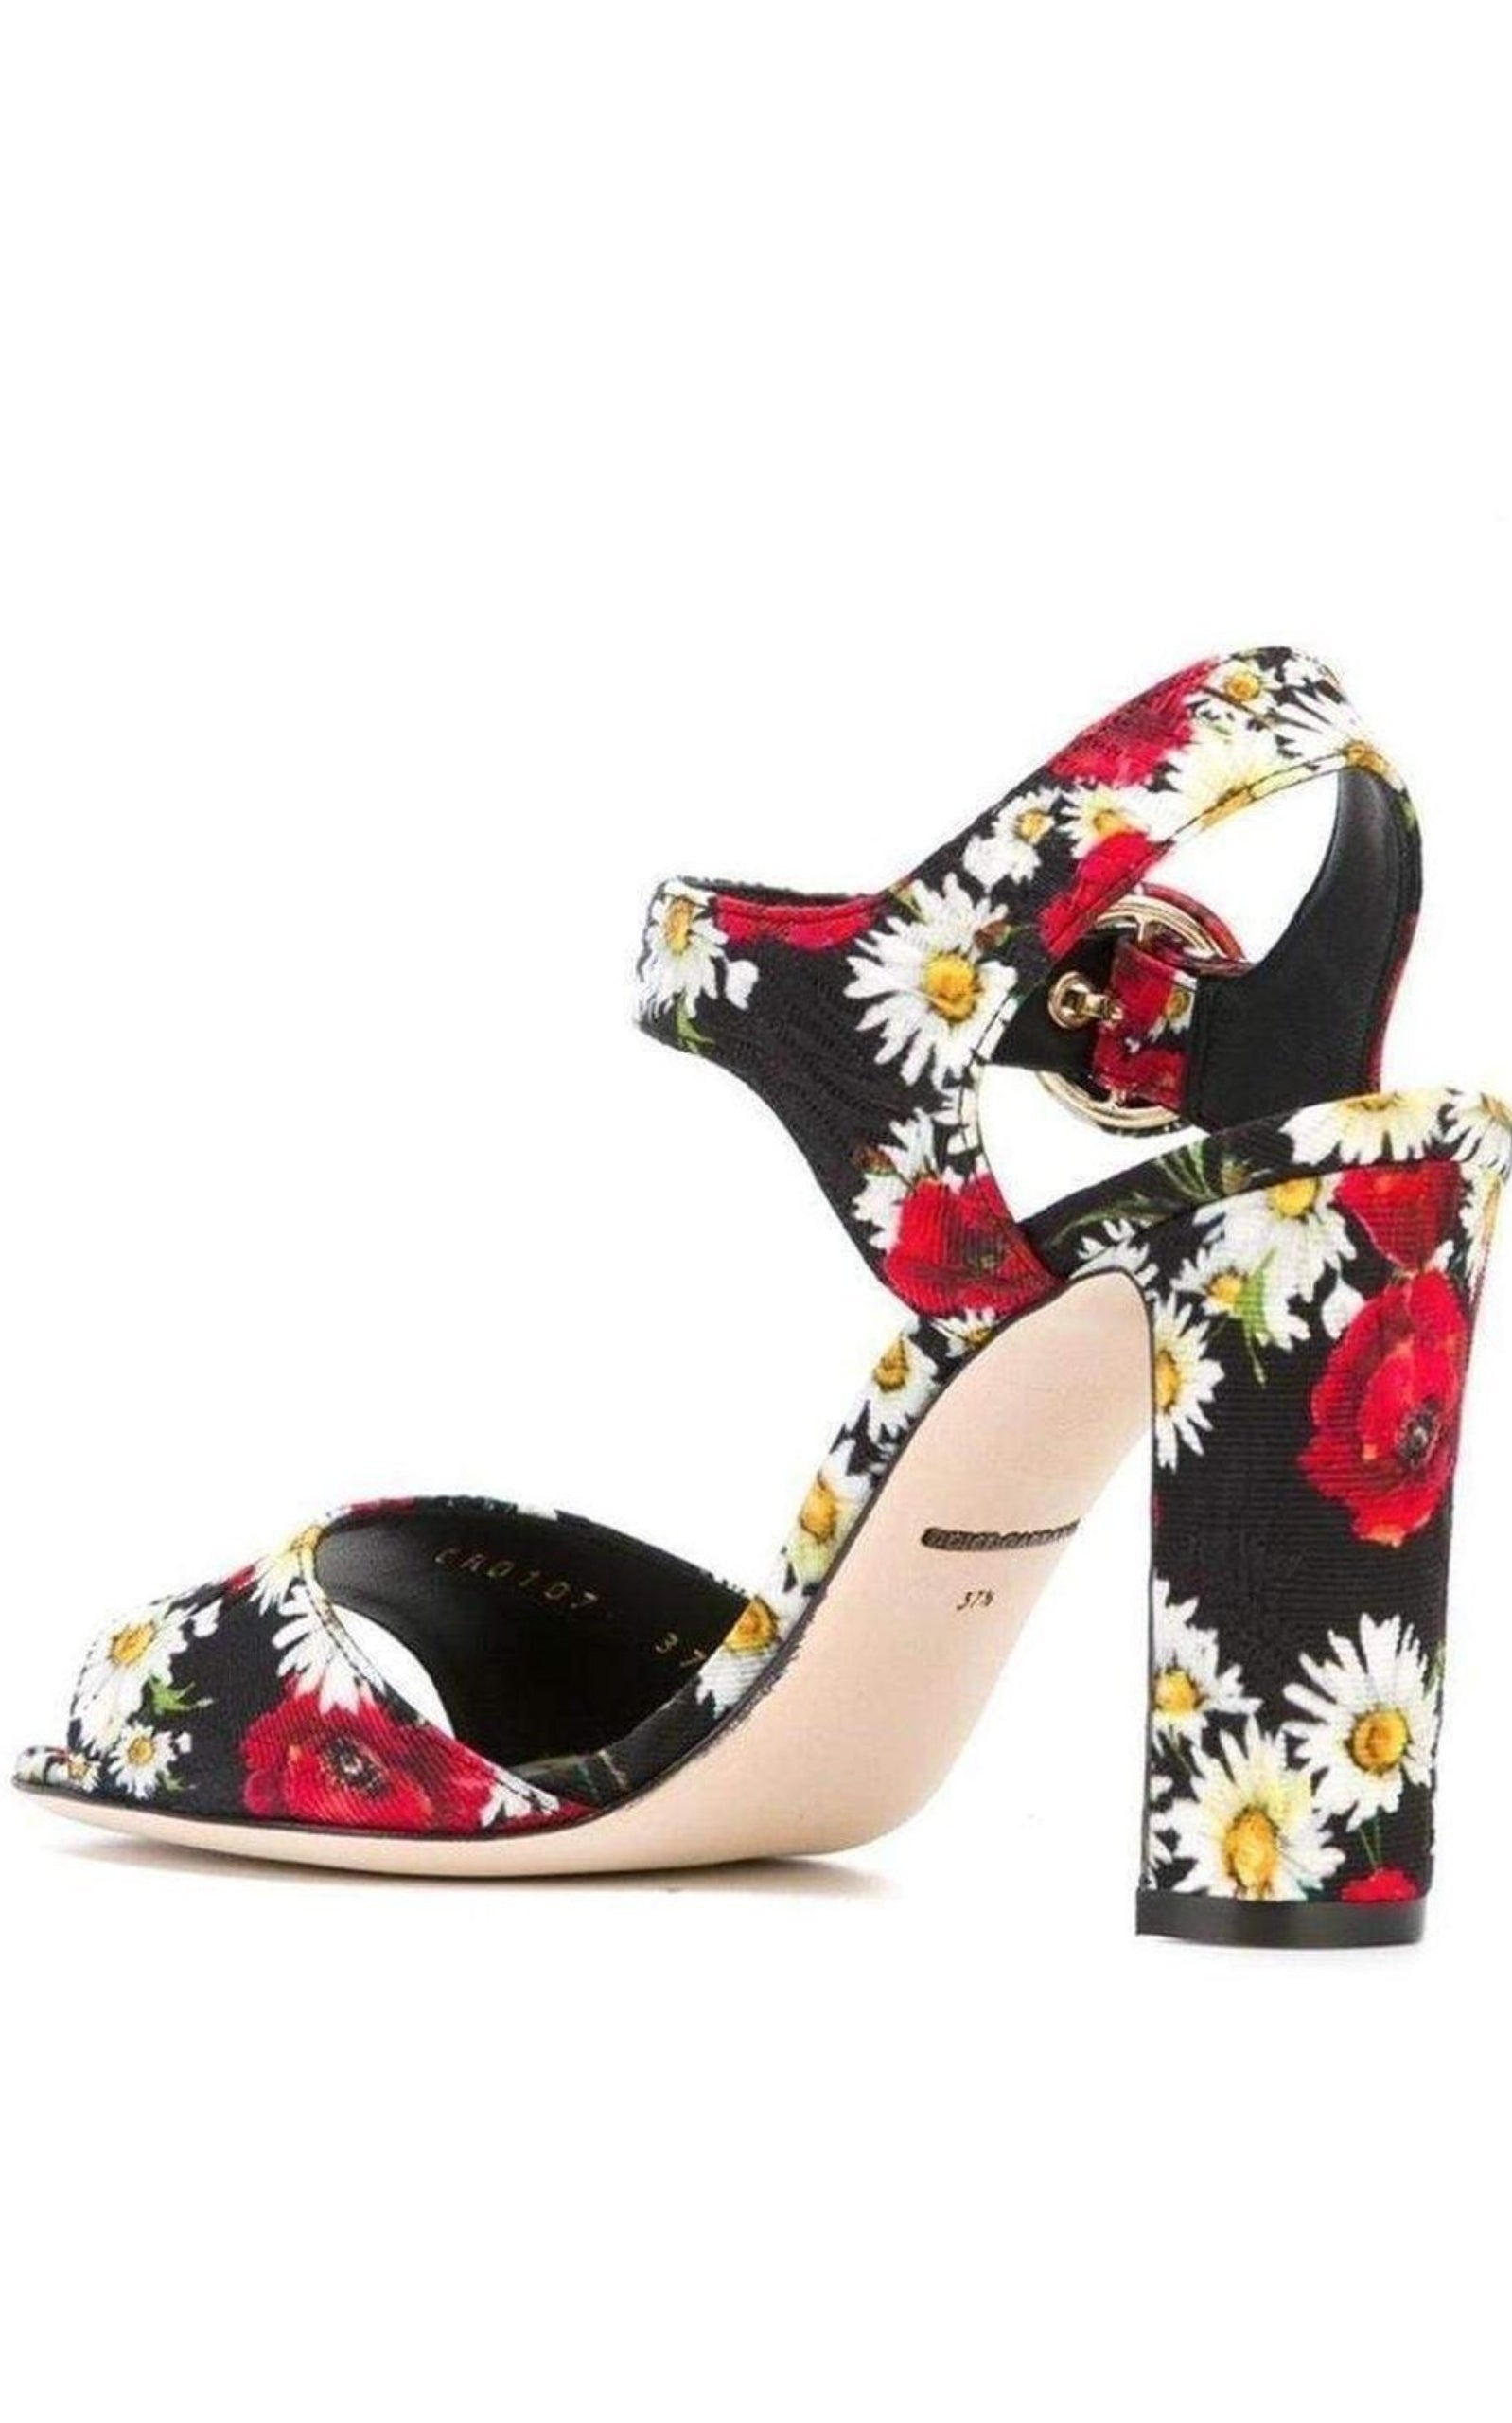 Daisy and Poppy Print Sandals - 3